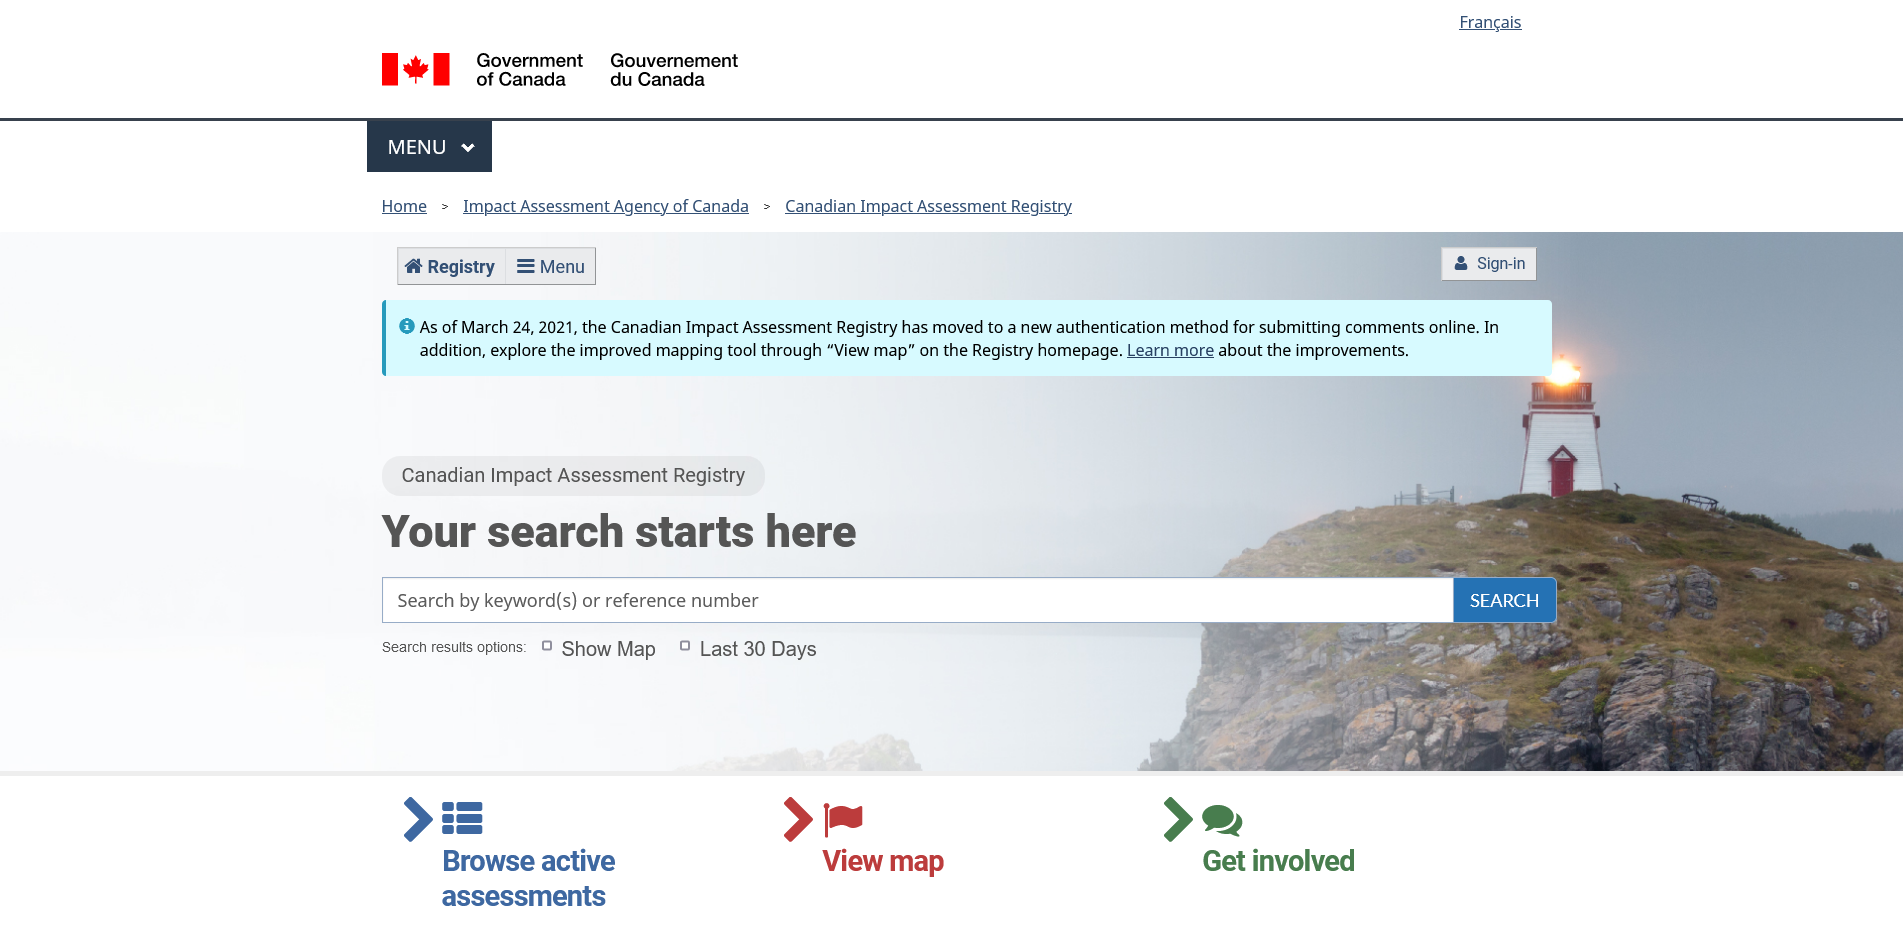 A screen capture of the Registry home page. At the bottom from left to right are the buttons, which read “Browse active assessments”, “View map”, and “Get involved”.